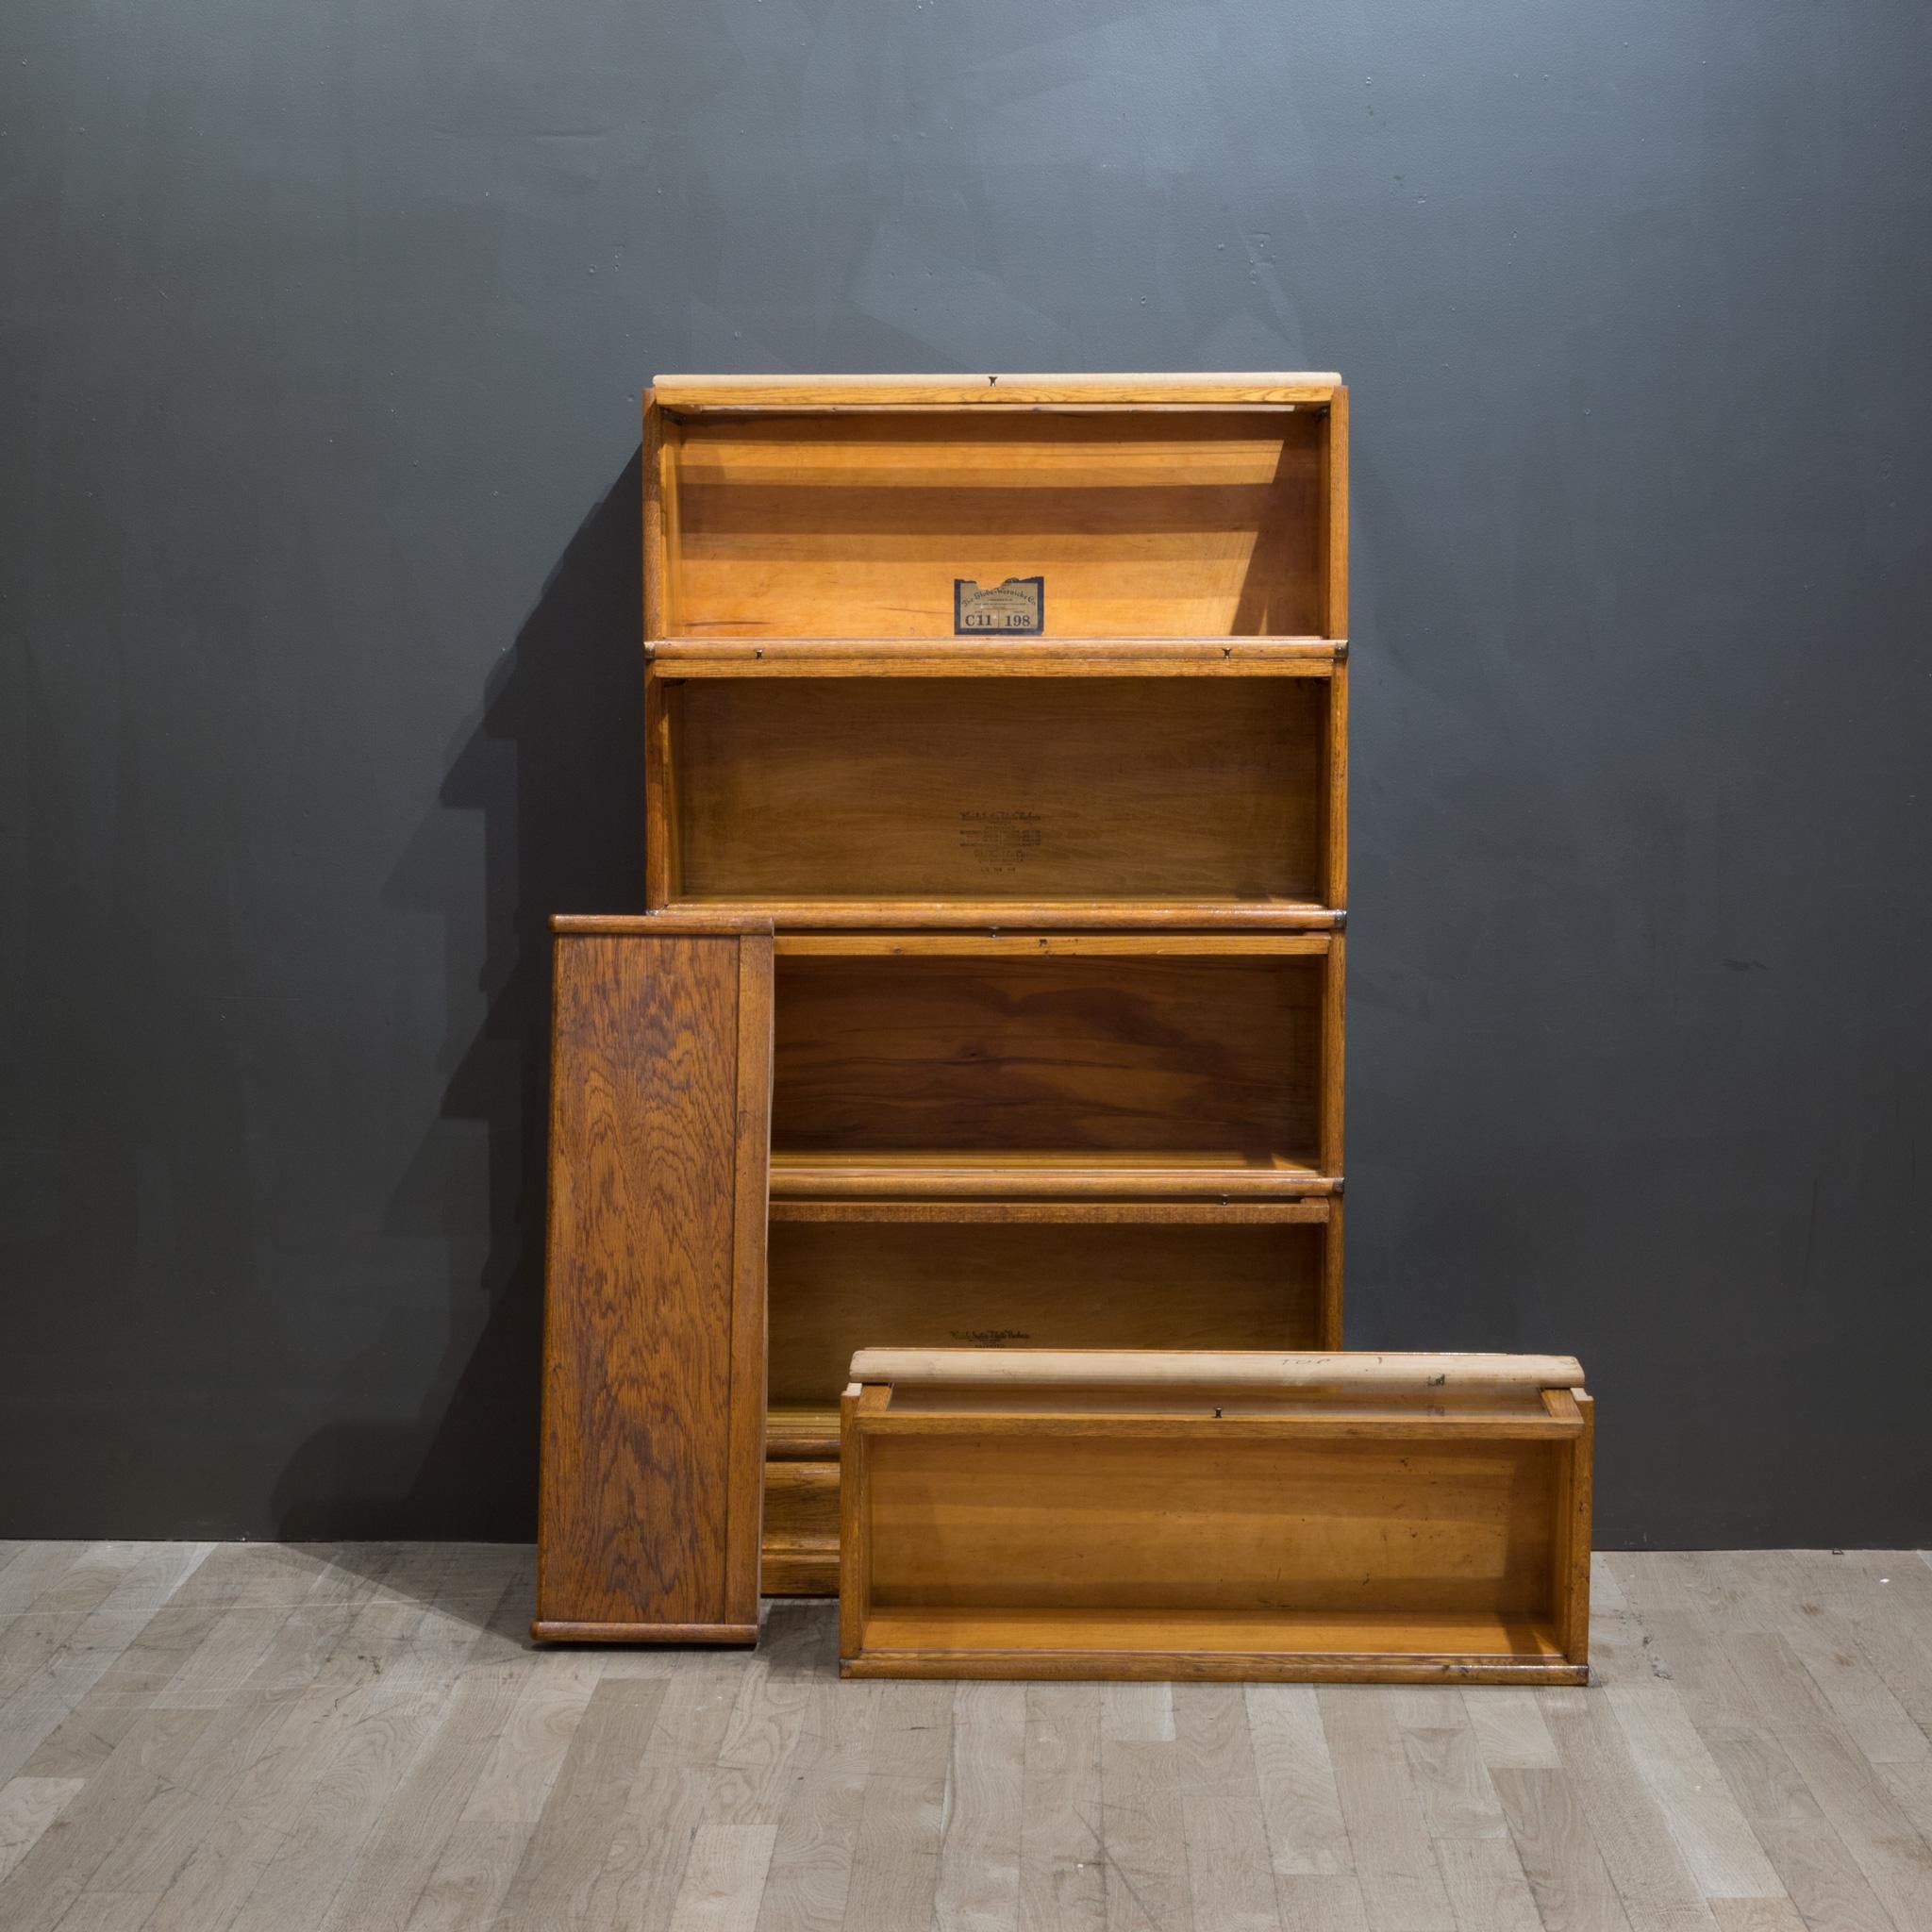 Early 20th C. Globe-Wernicke 5 Stack Lawyer's Bookcase c.1890 For Sale 5